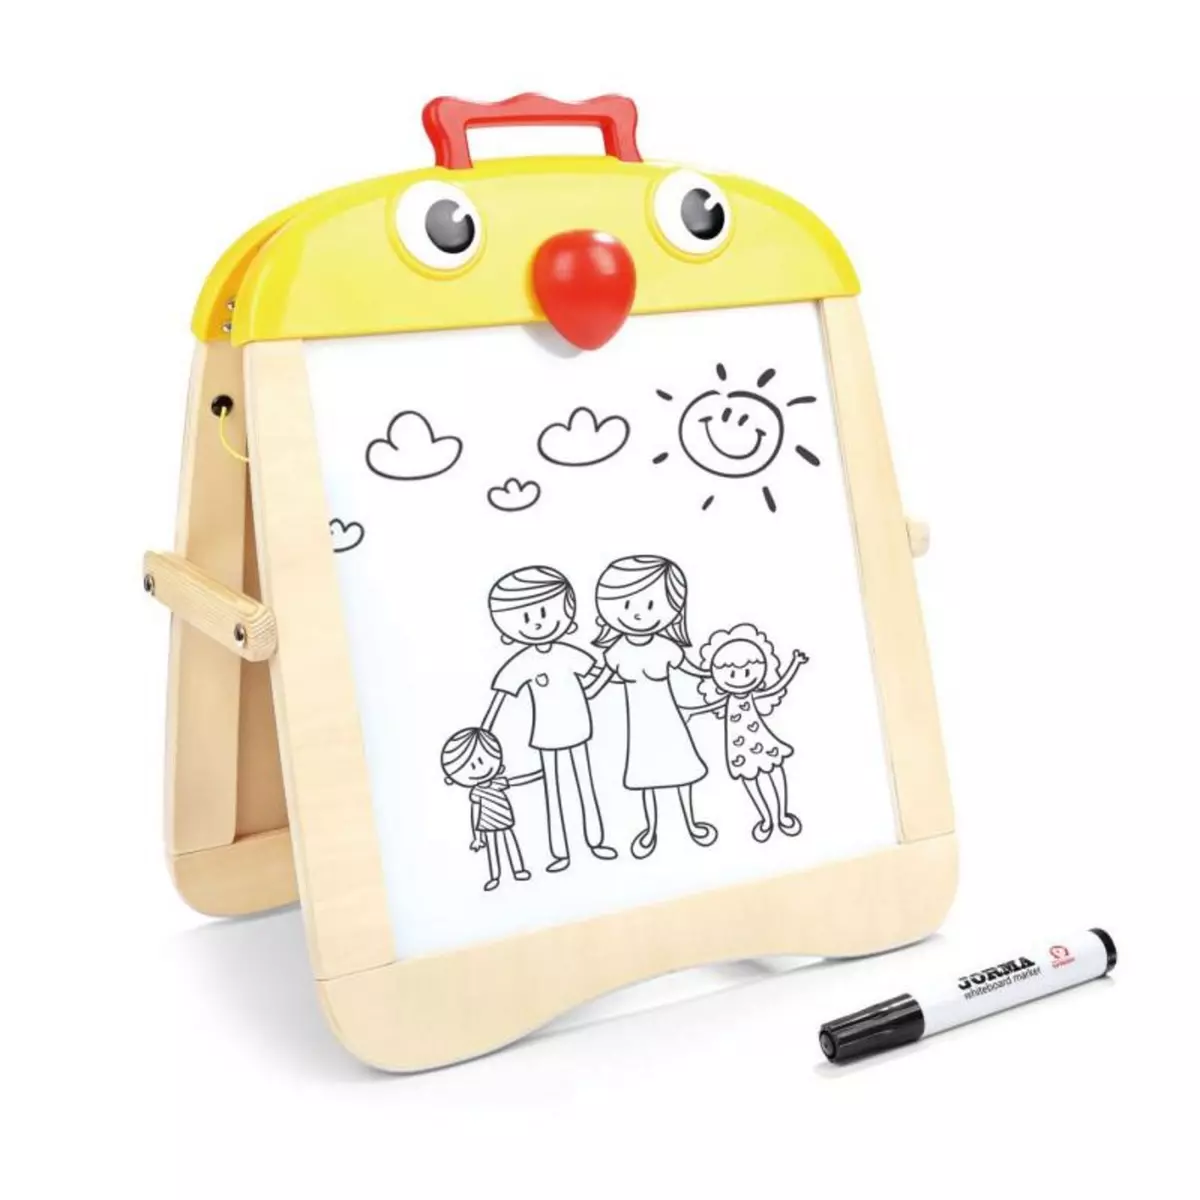 TOPBRIGHT Topbright - Portable Whiteboard Chick 120300